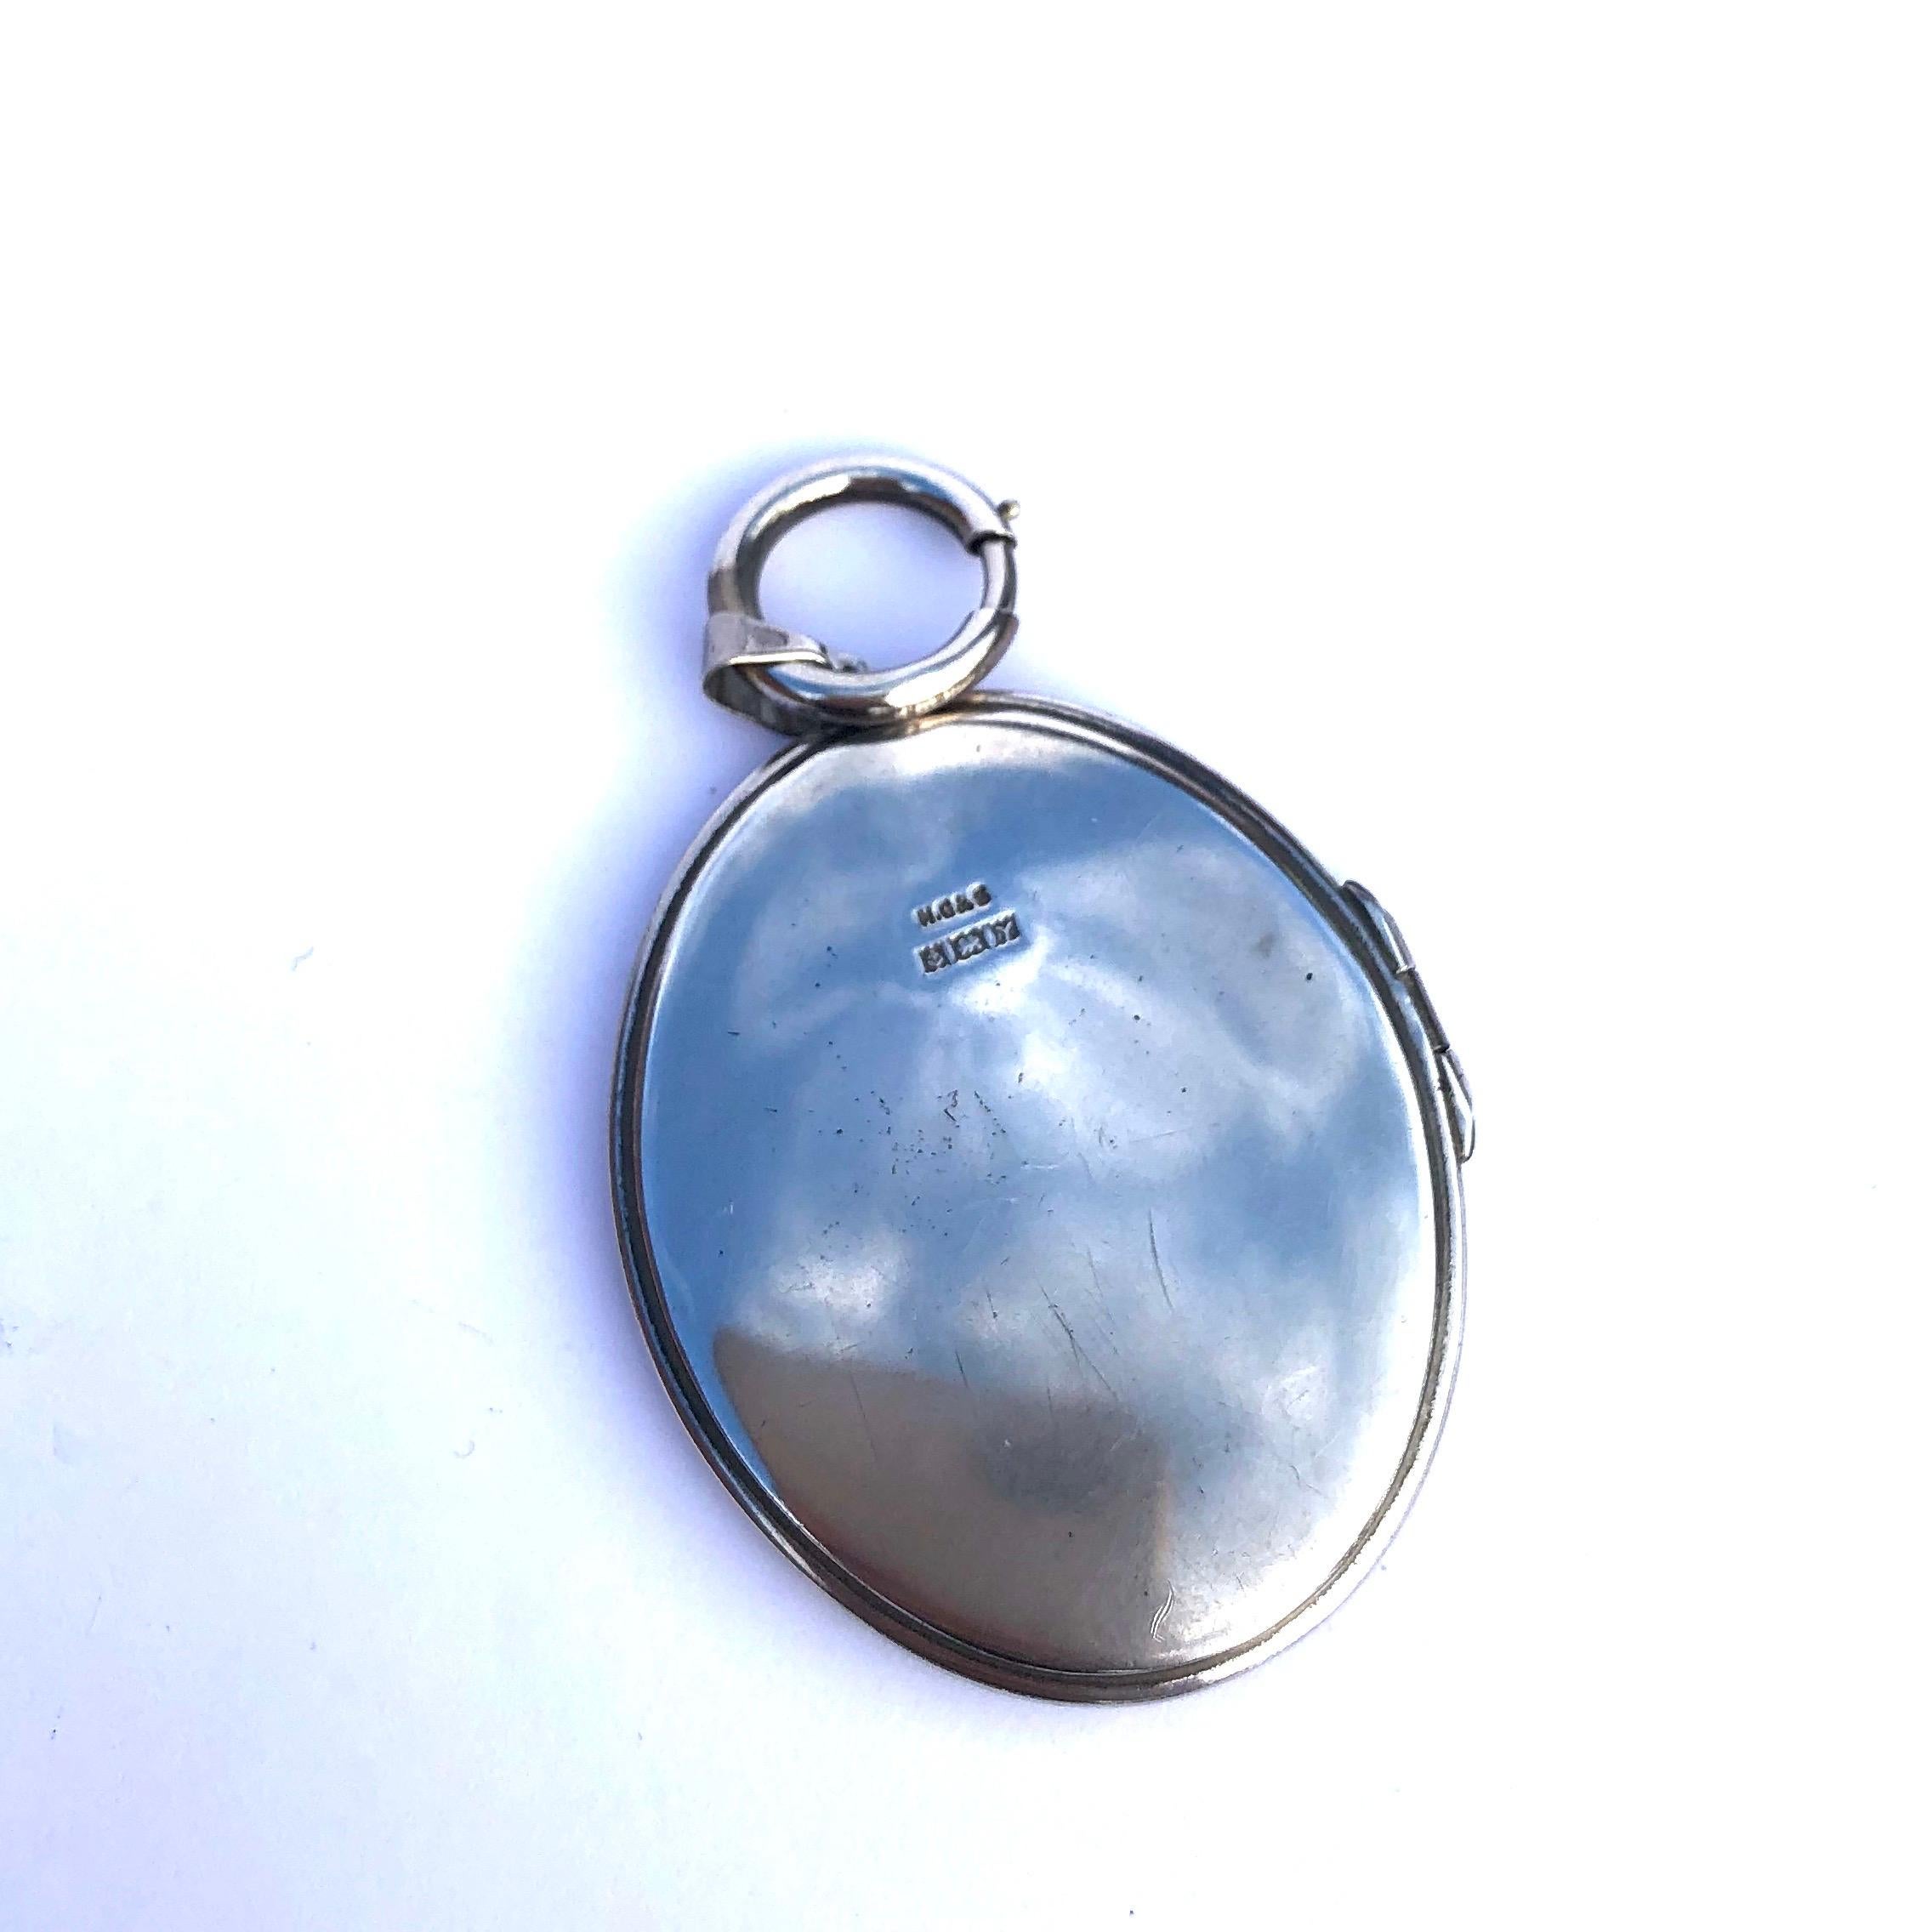 This locket is slim and has a delicate feeling despite it being quite large. The classic engrave is a swirl style with lots of detail. At the top of the locket there is a large chunky bolt clip, which makes the locket feel modern and stylish. Made